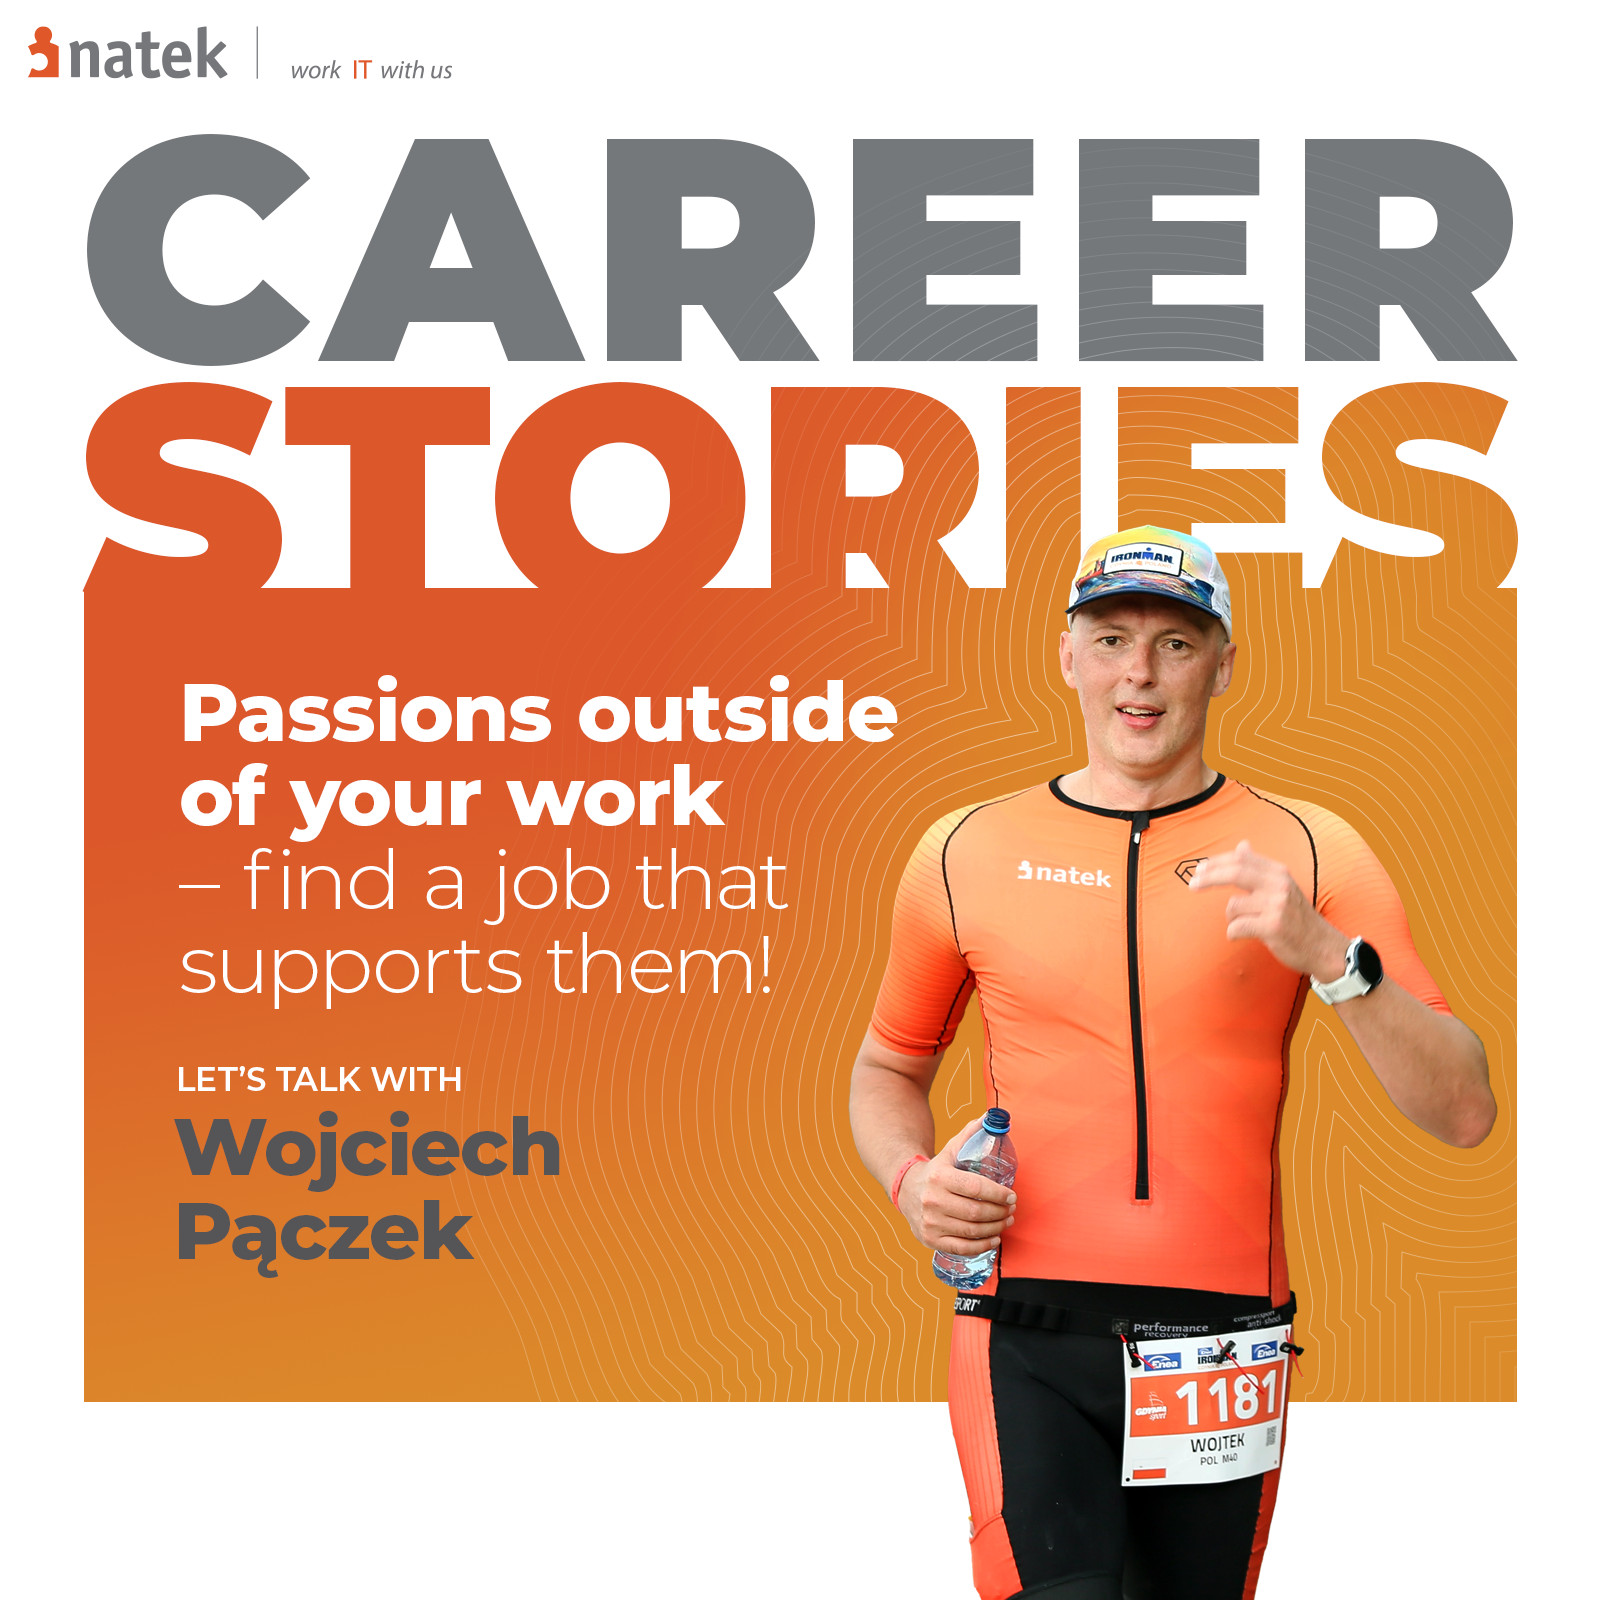 Career Stories: Find a job that supports your passions outside of work